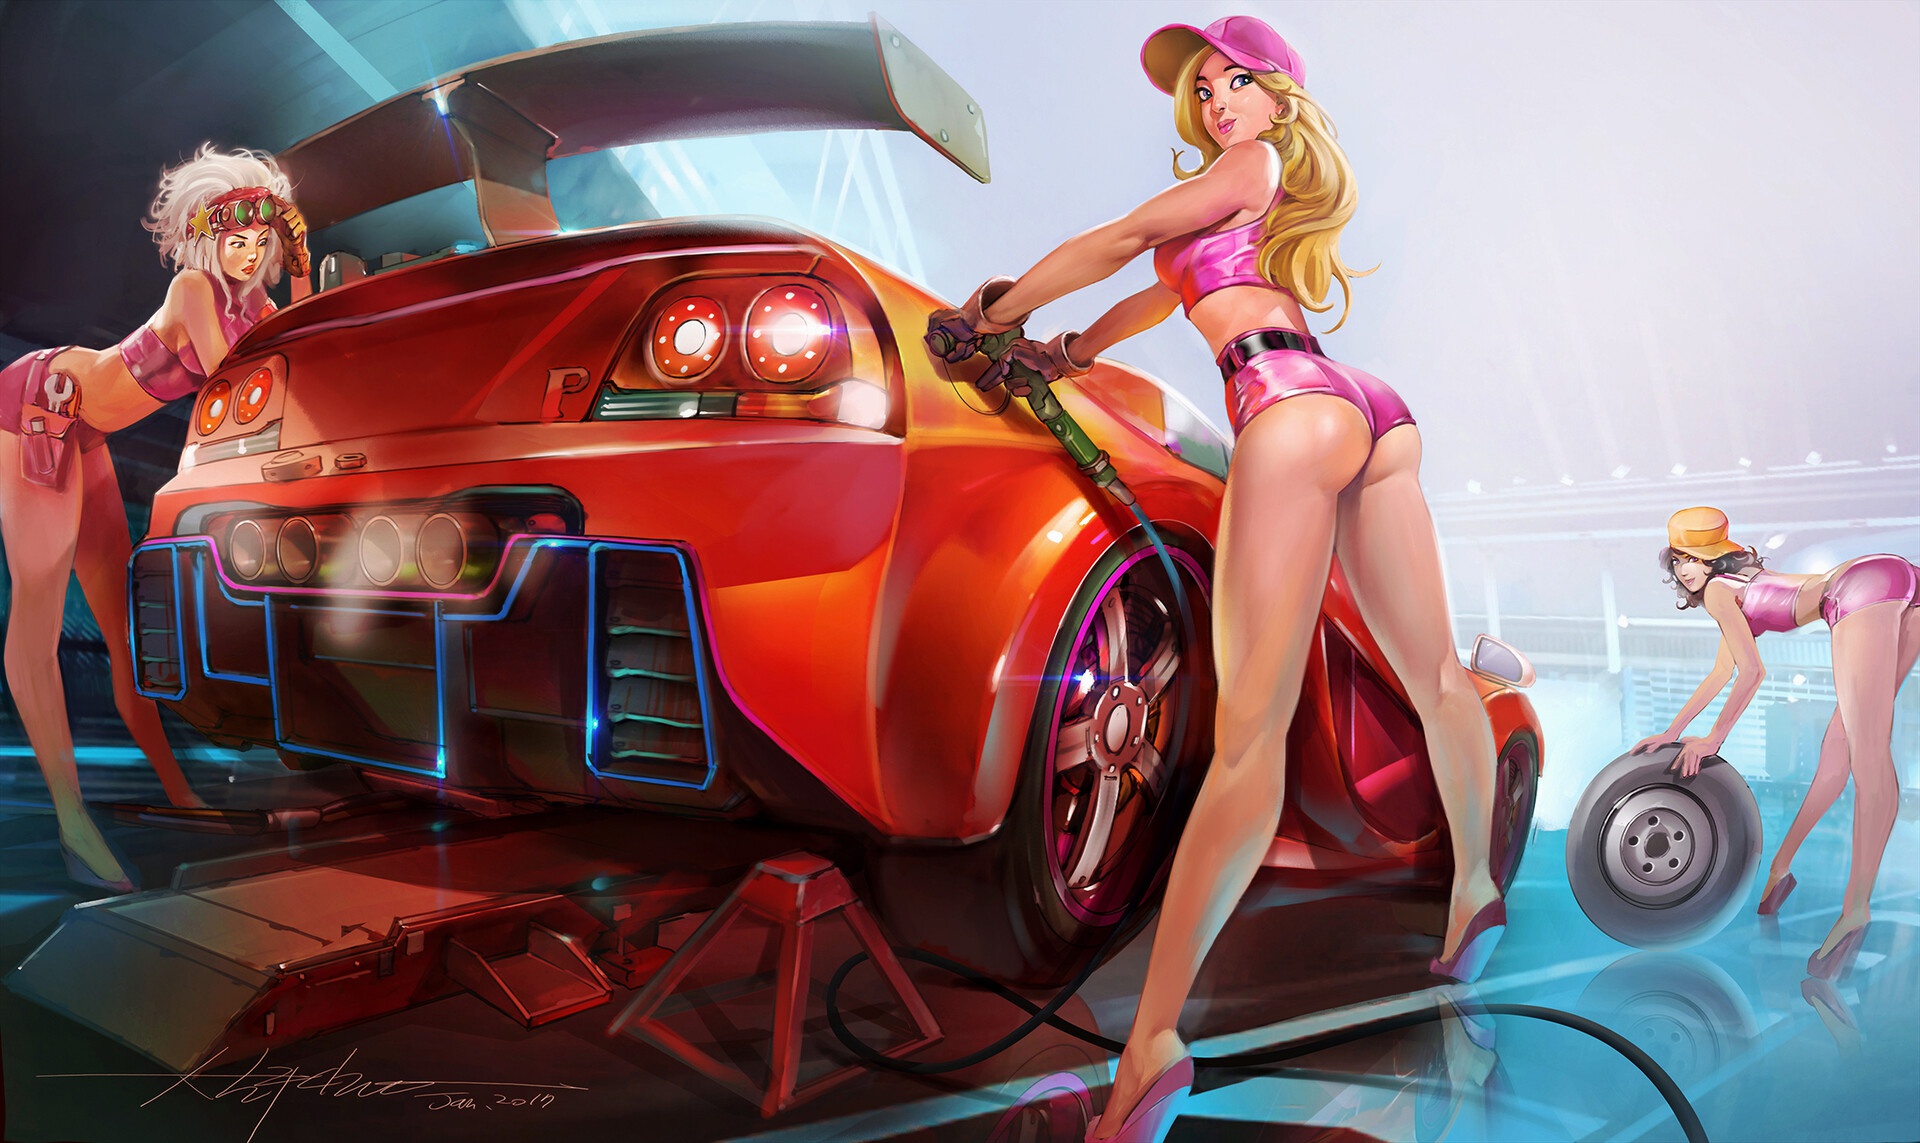 General 1920x1143 car ass vehicle women artwork blonde red cars legs low-angle Nissan Skyline R33 Nissan Skyline Nissan photo manipulation women with cars Japanese cars